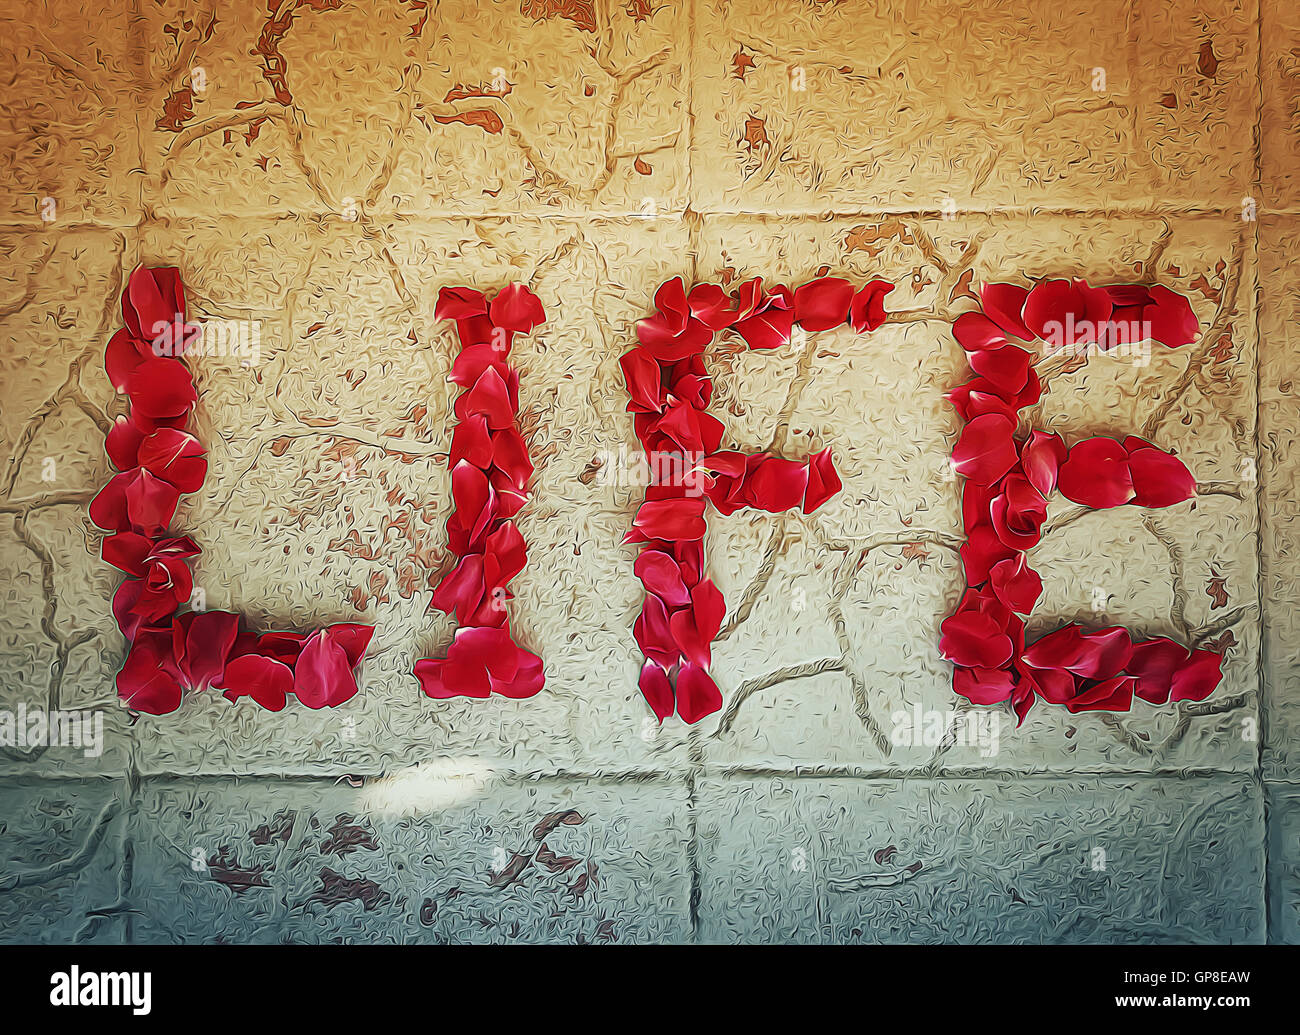 Illustration of word life by red rose petals on a old texture Stock Photo